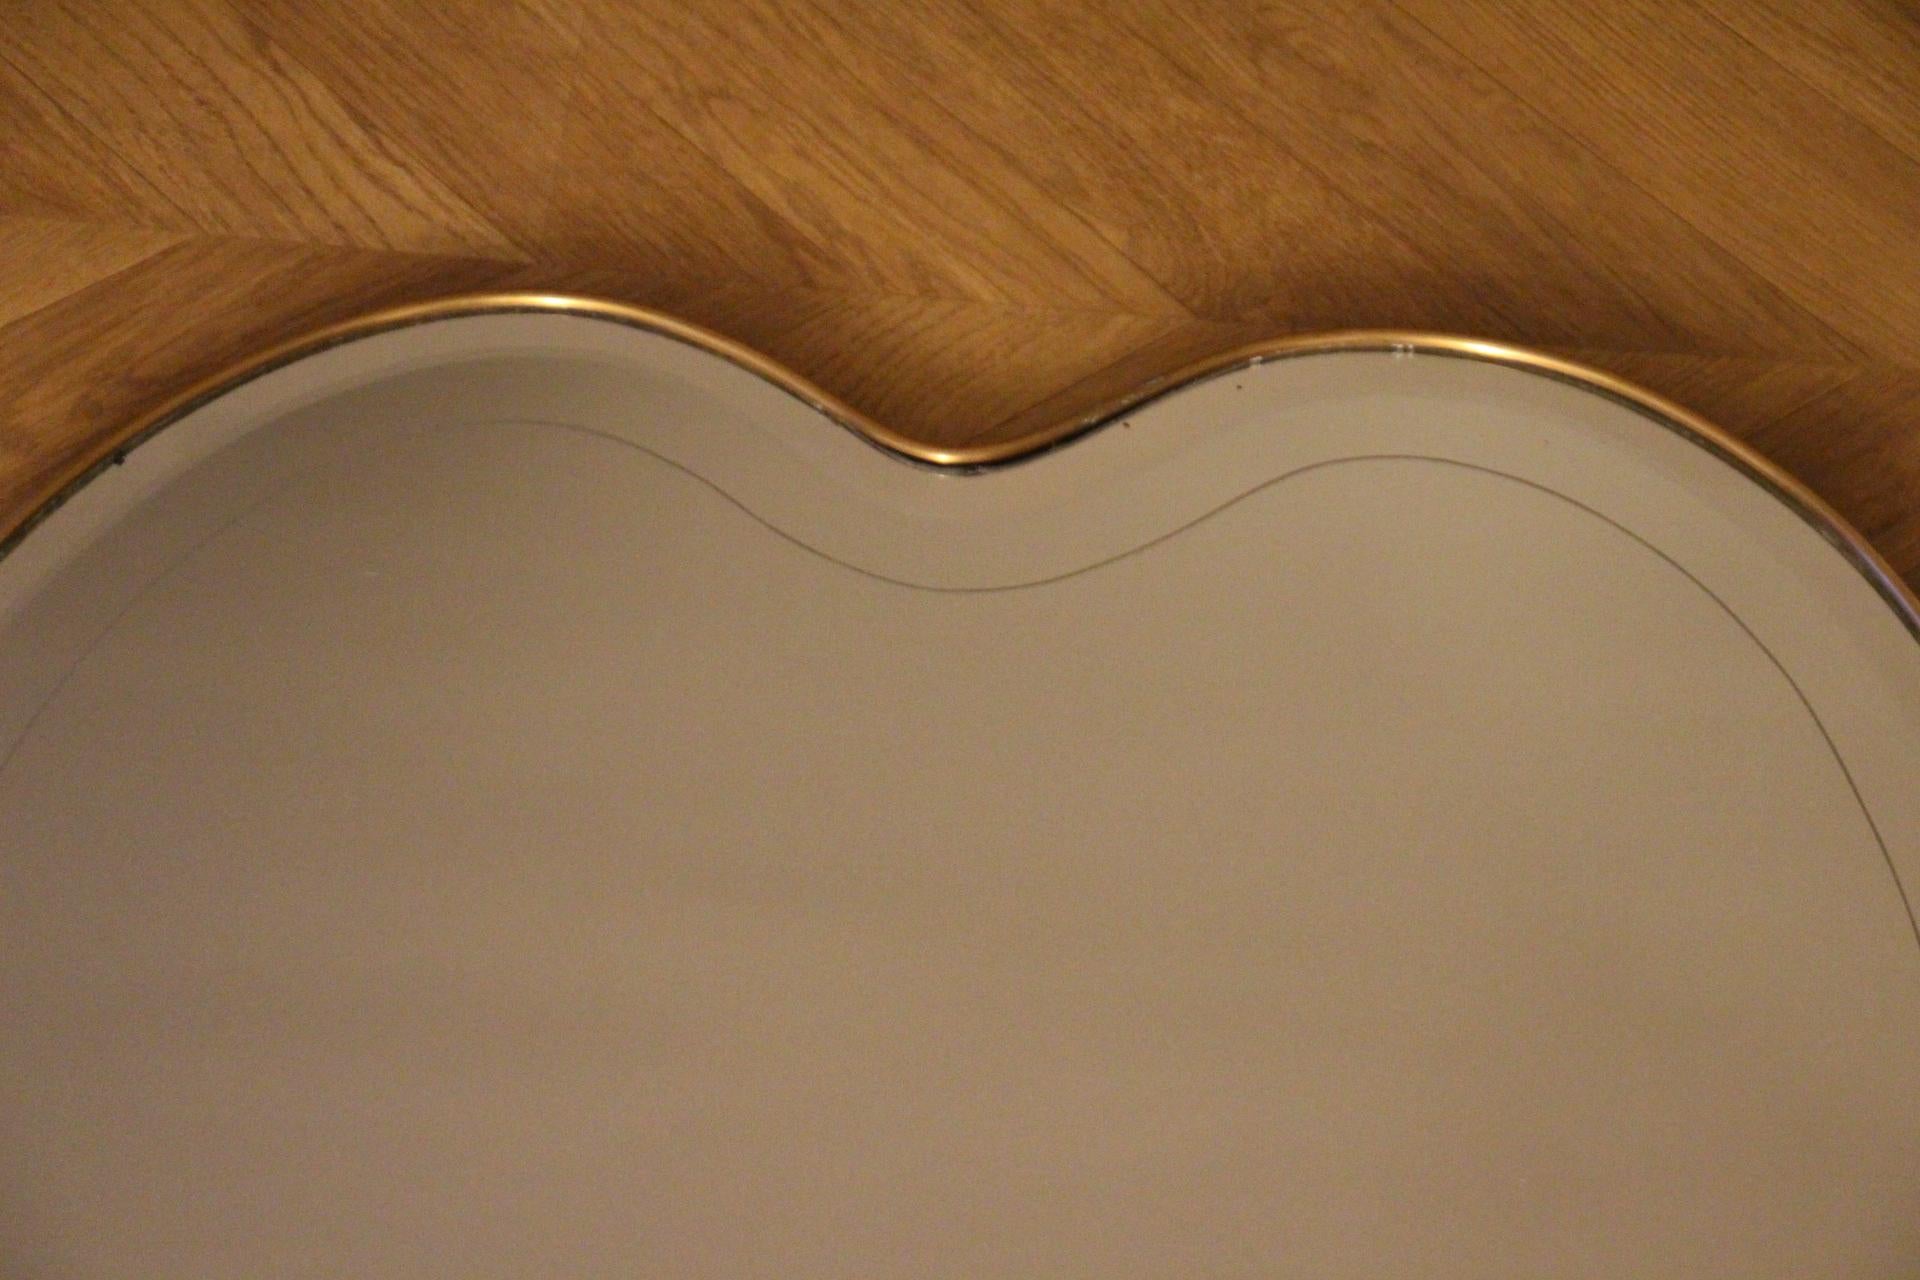 Large 1950's Modernist Shaped Brass Wall Mirror, Heart Shaped, Gio Ponti Style For Sale 3